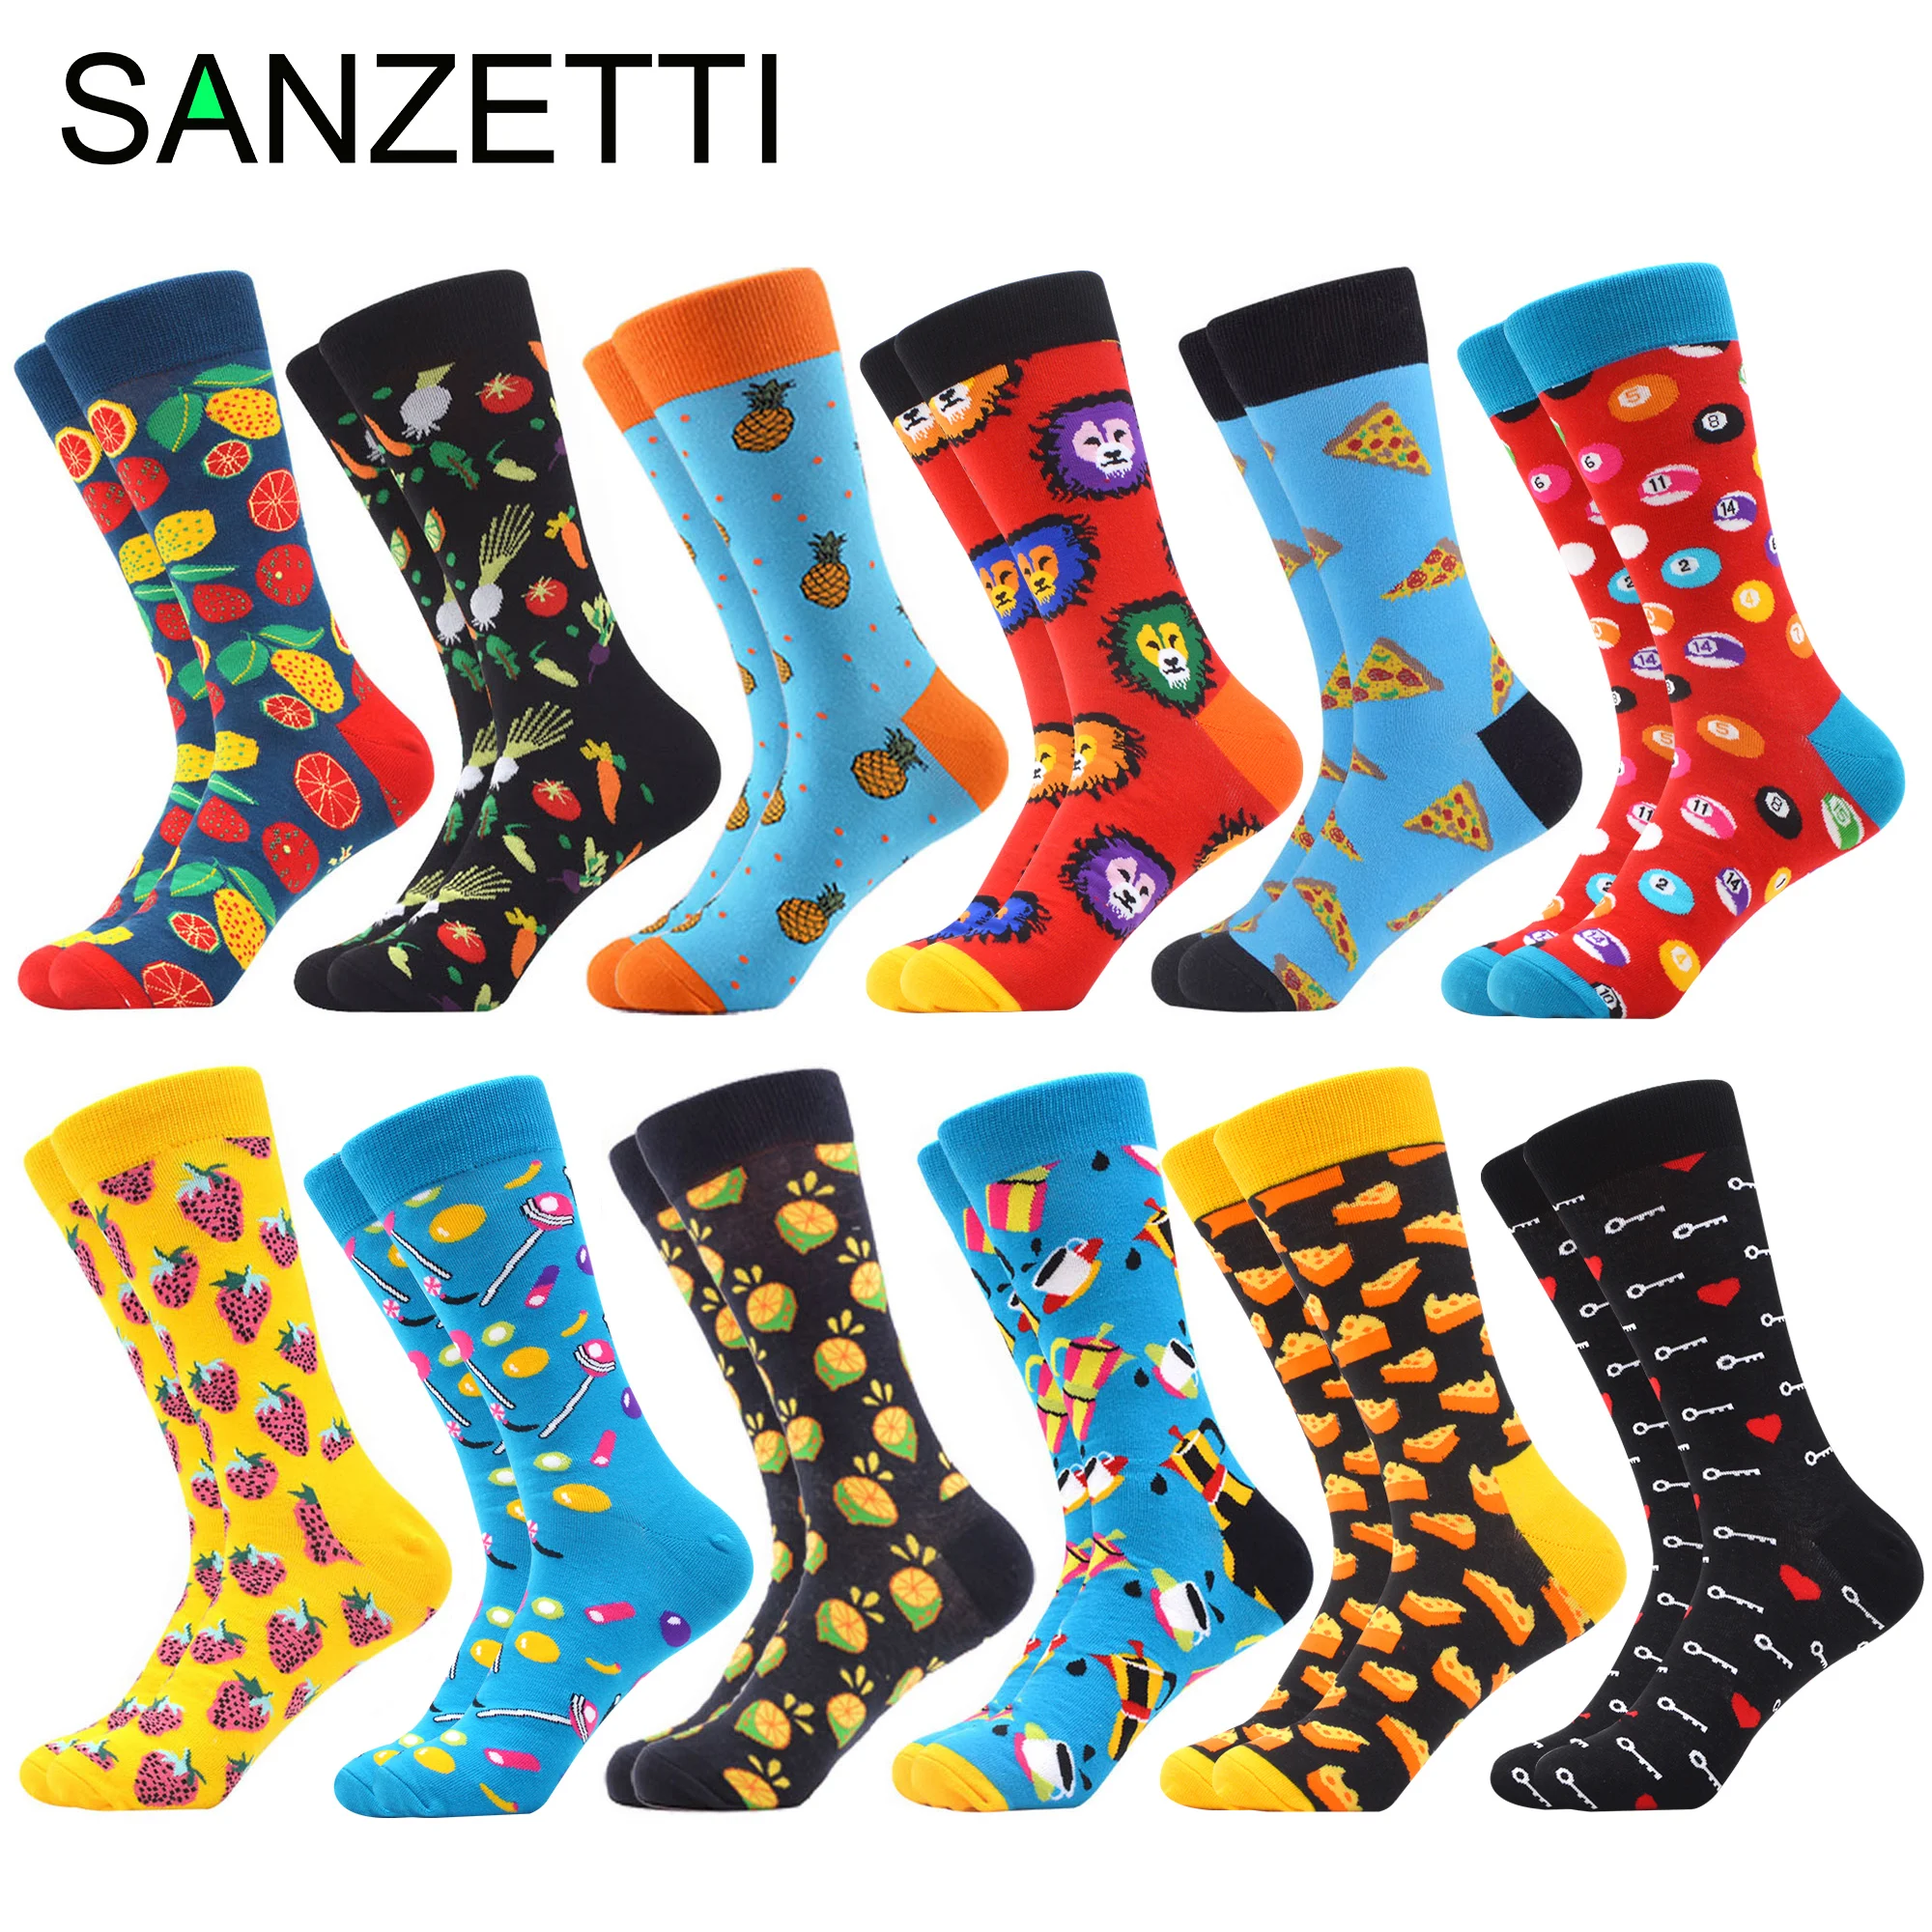 

SANZETTI 5-12 Pairs Colorful Men Crew Socks Happy Novelty High Quality Skateboard Gifts Socks Combed Cotton Fruits Animals Sock